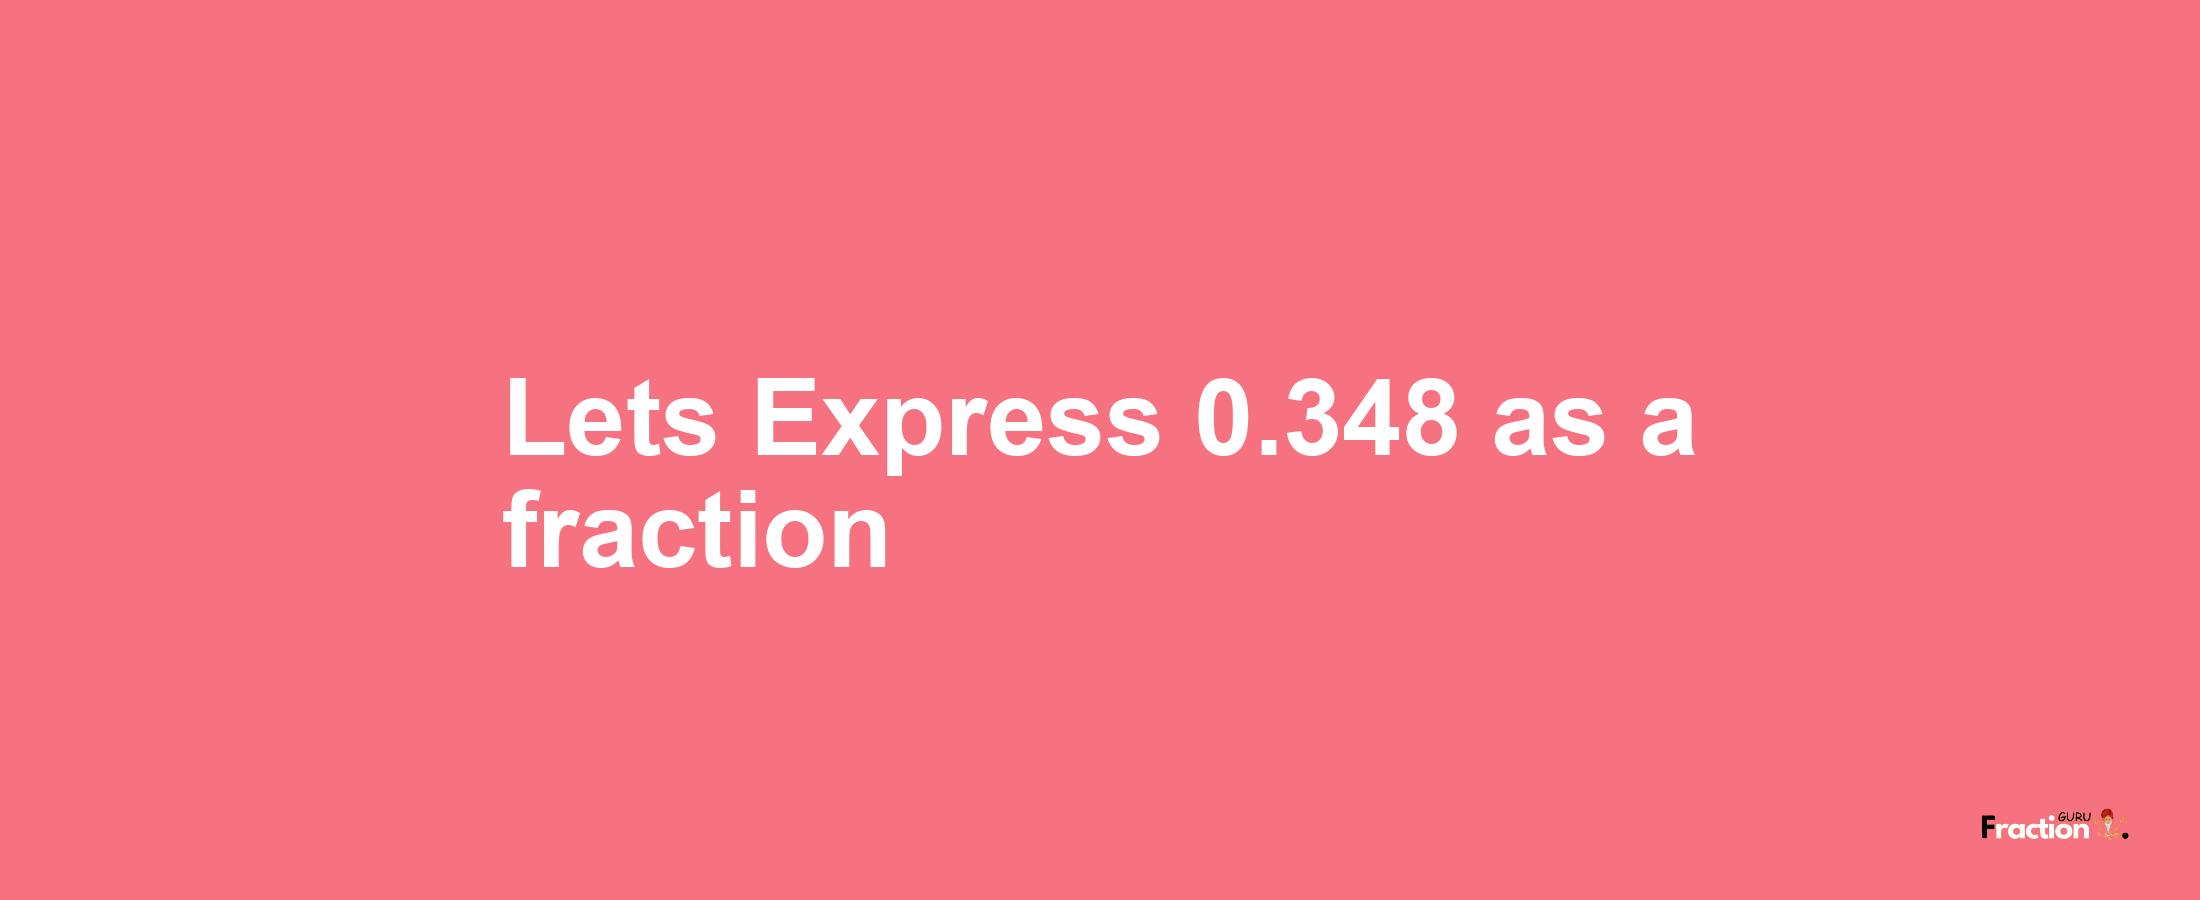 Lets Express 0.348 as afraction